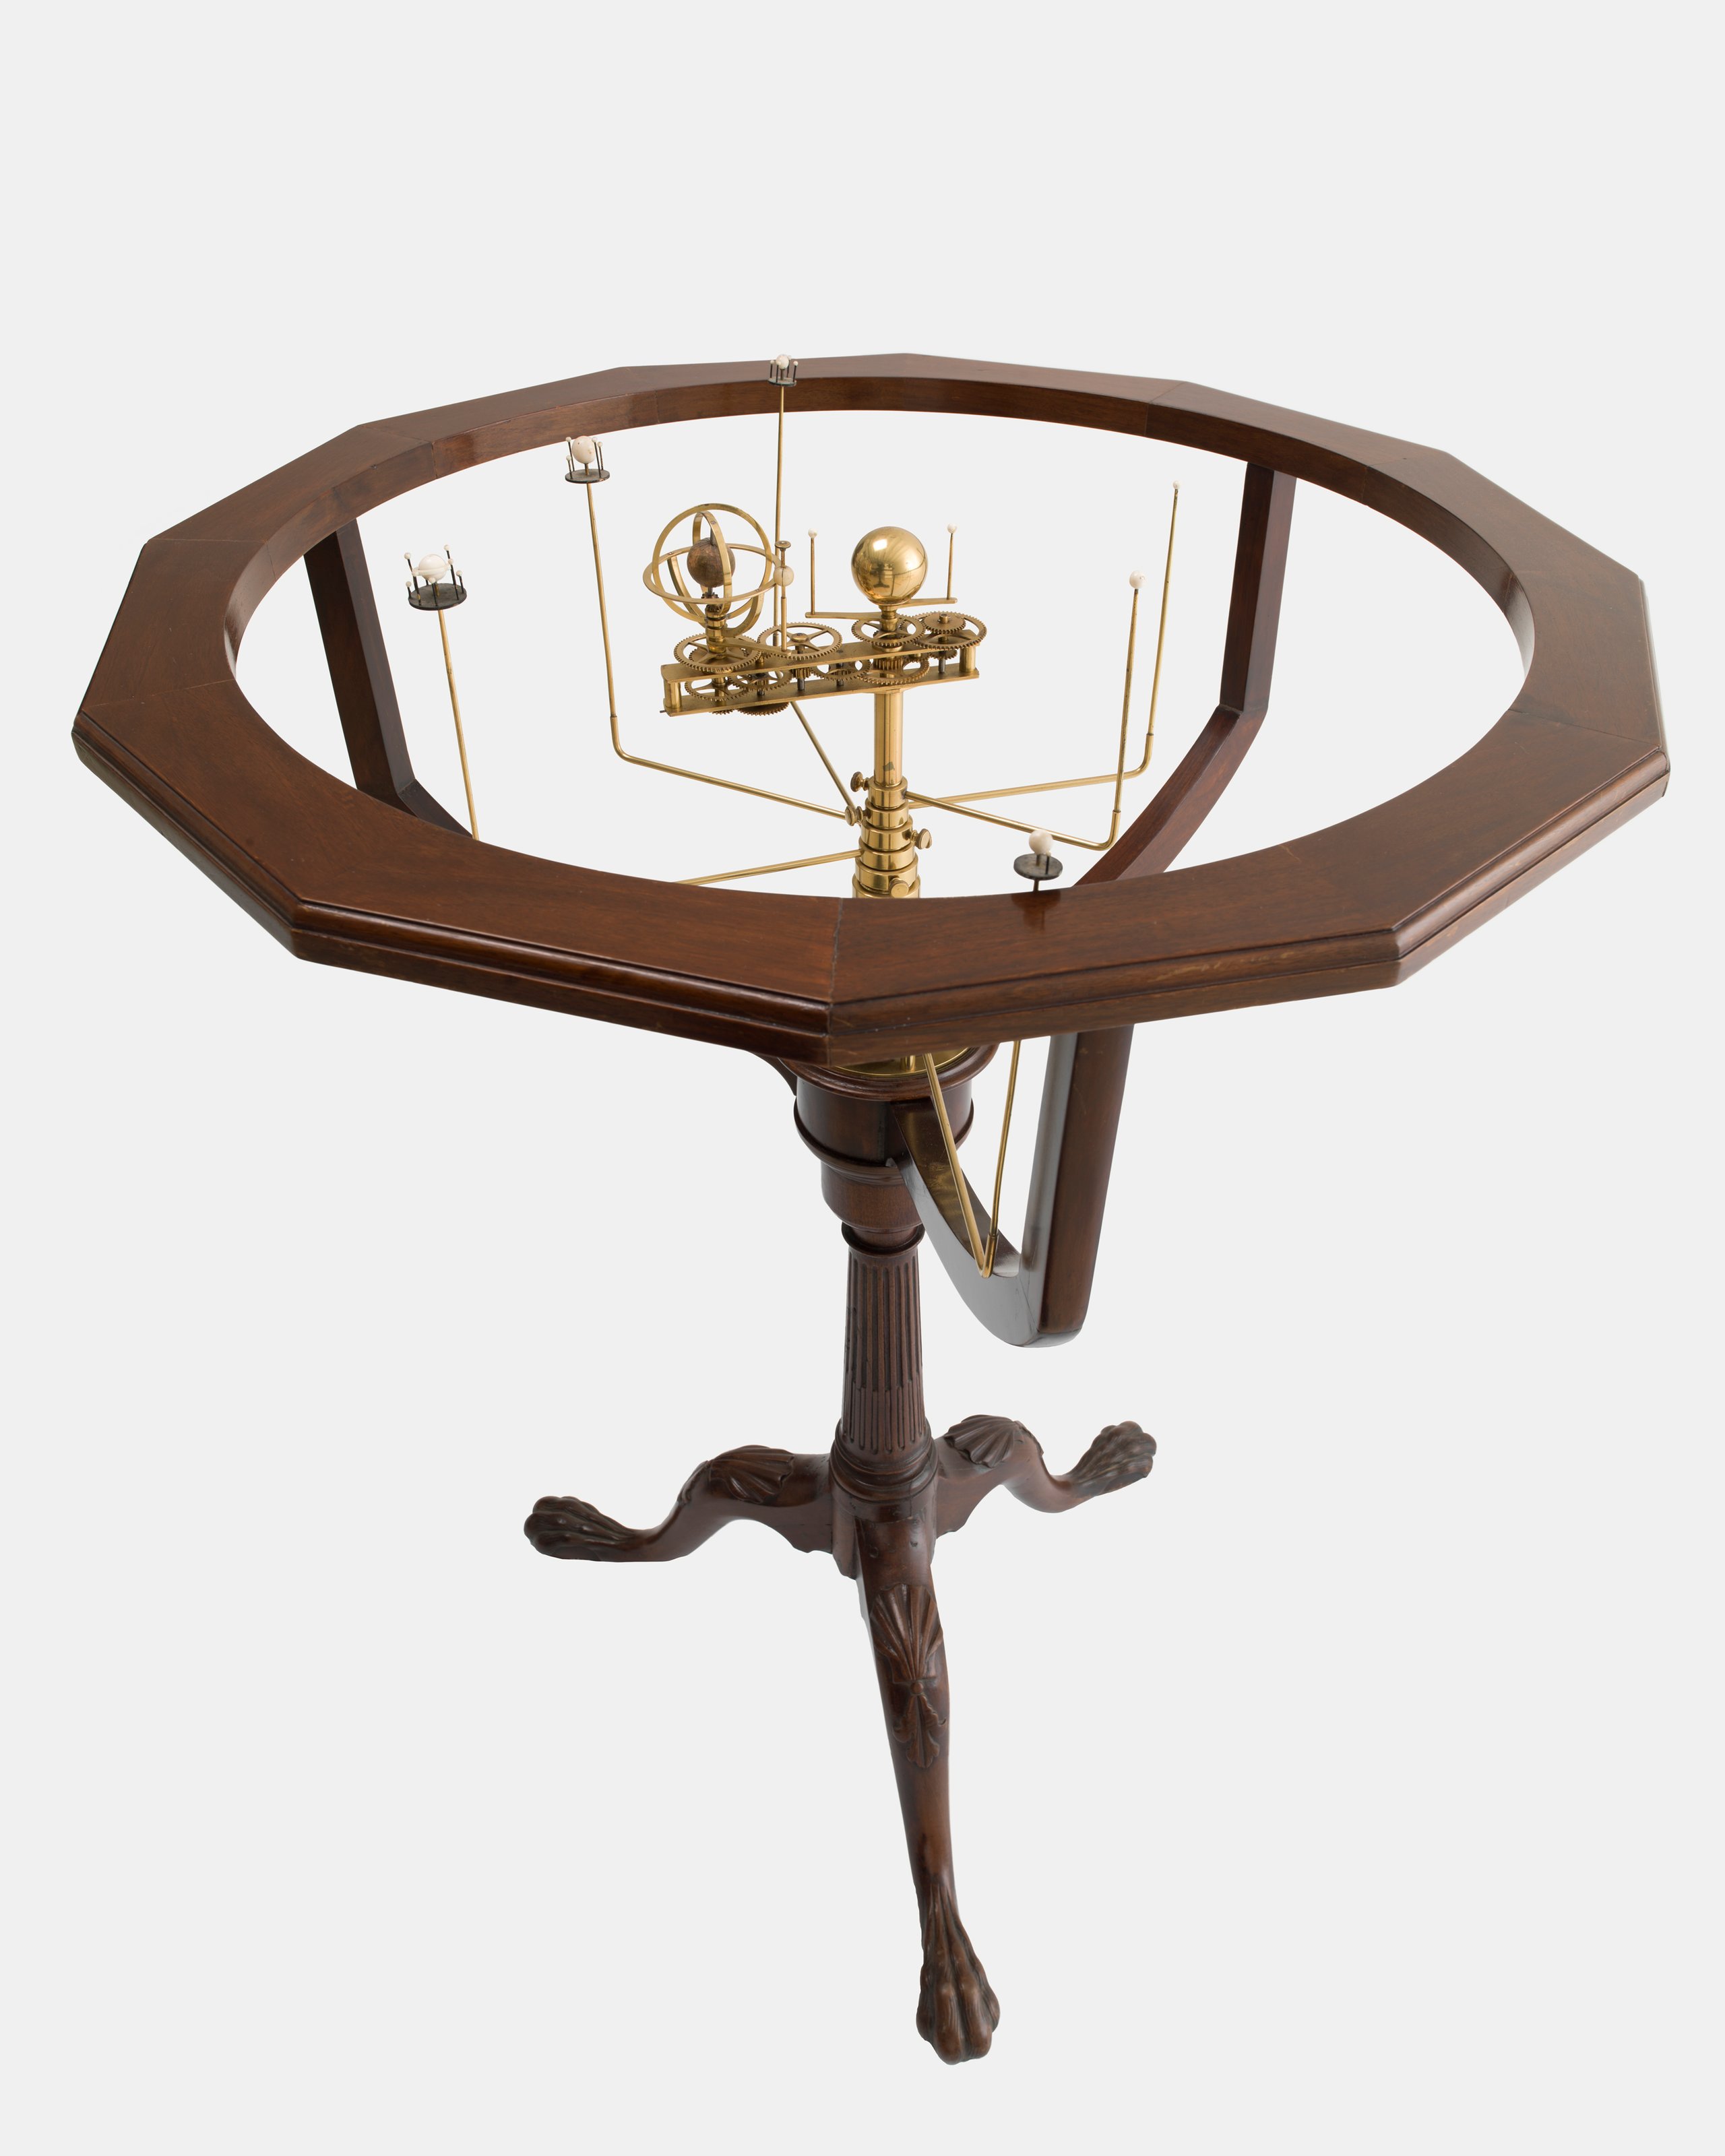 Orrery and stand from France